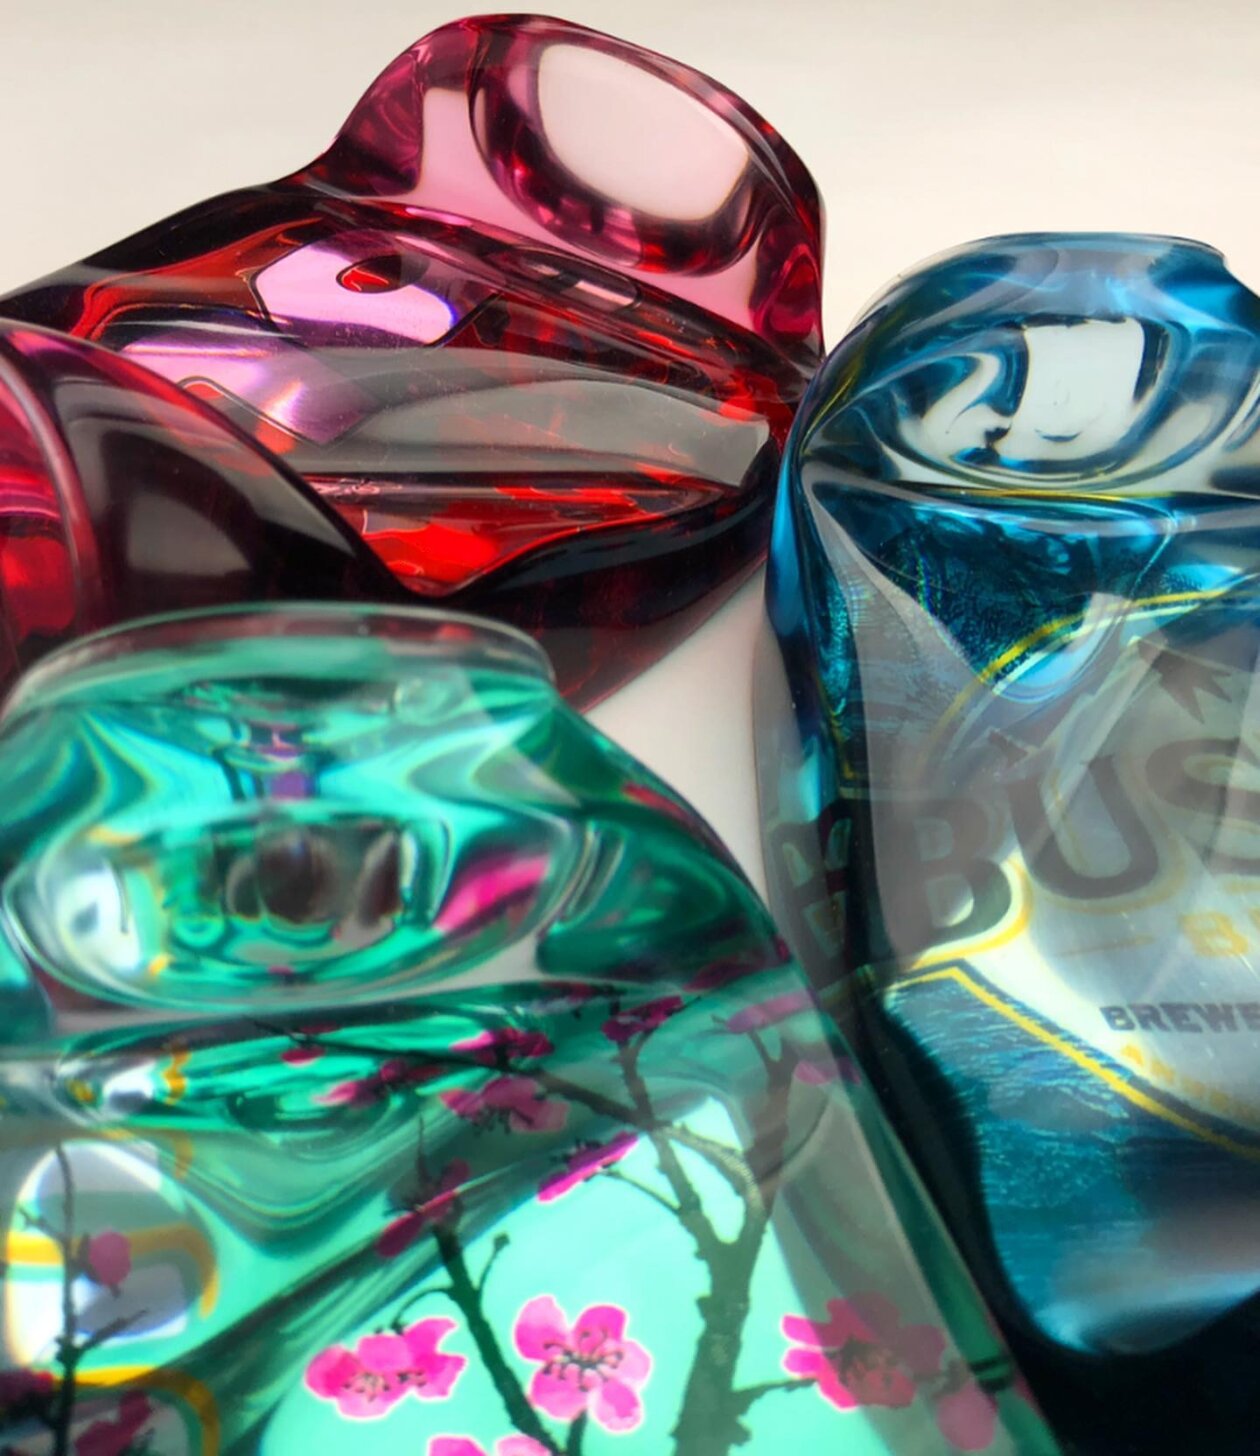 Clear Resin Sculptures Of Clothes And Objects By Chris Bakay (13)